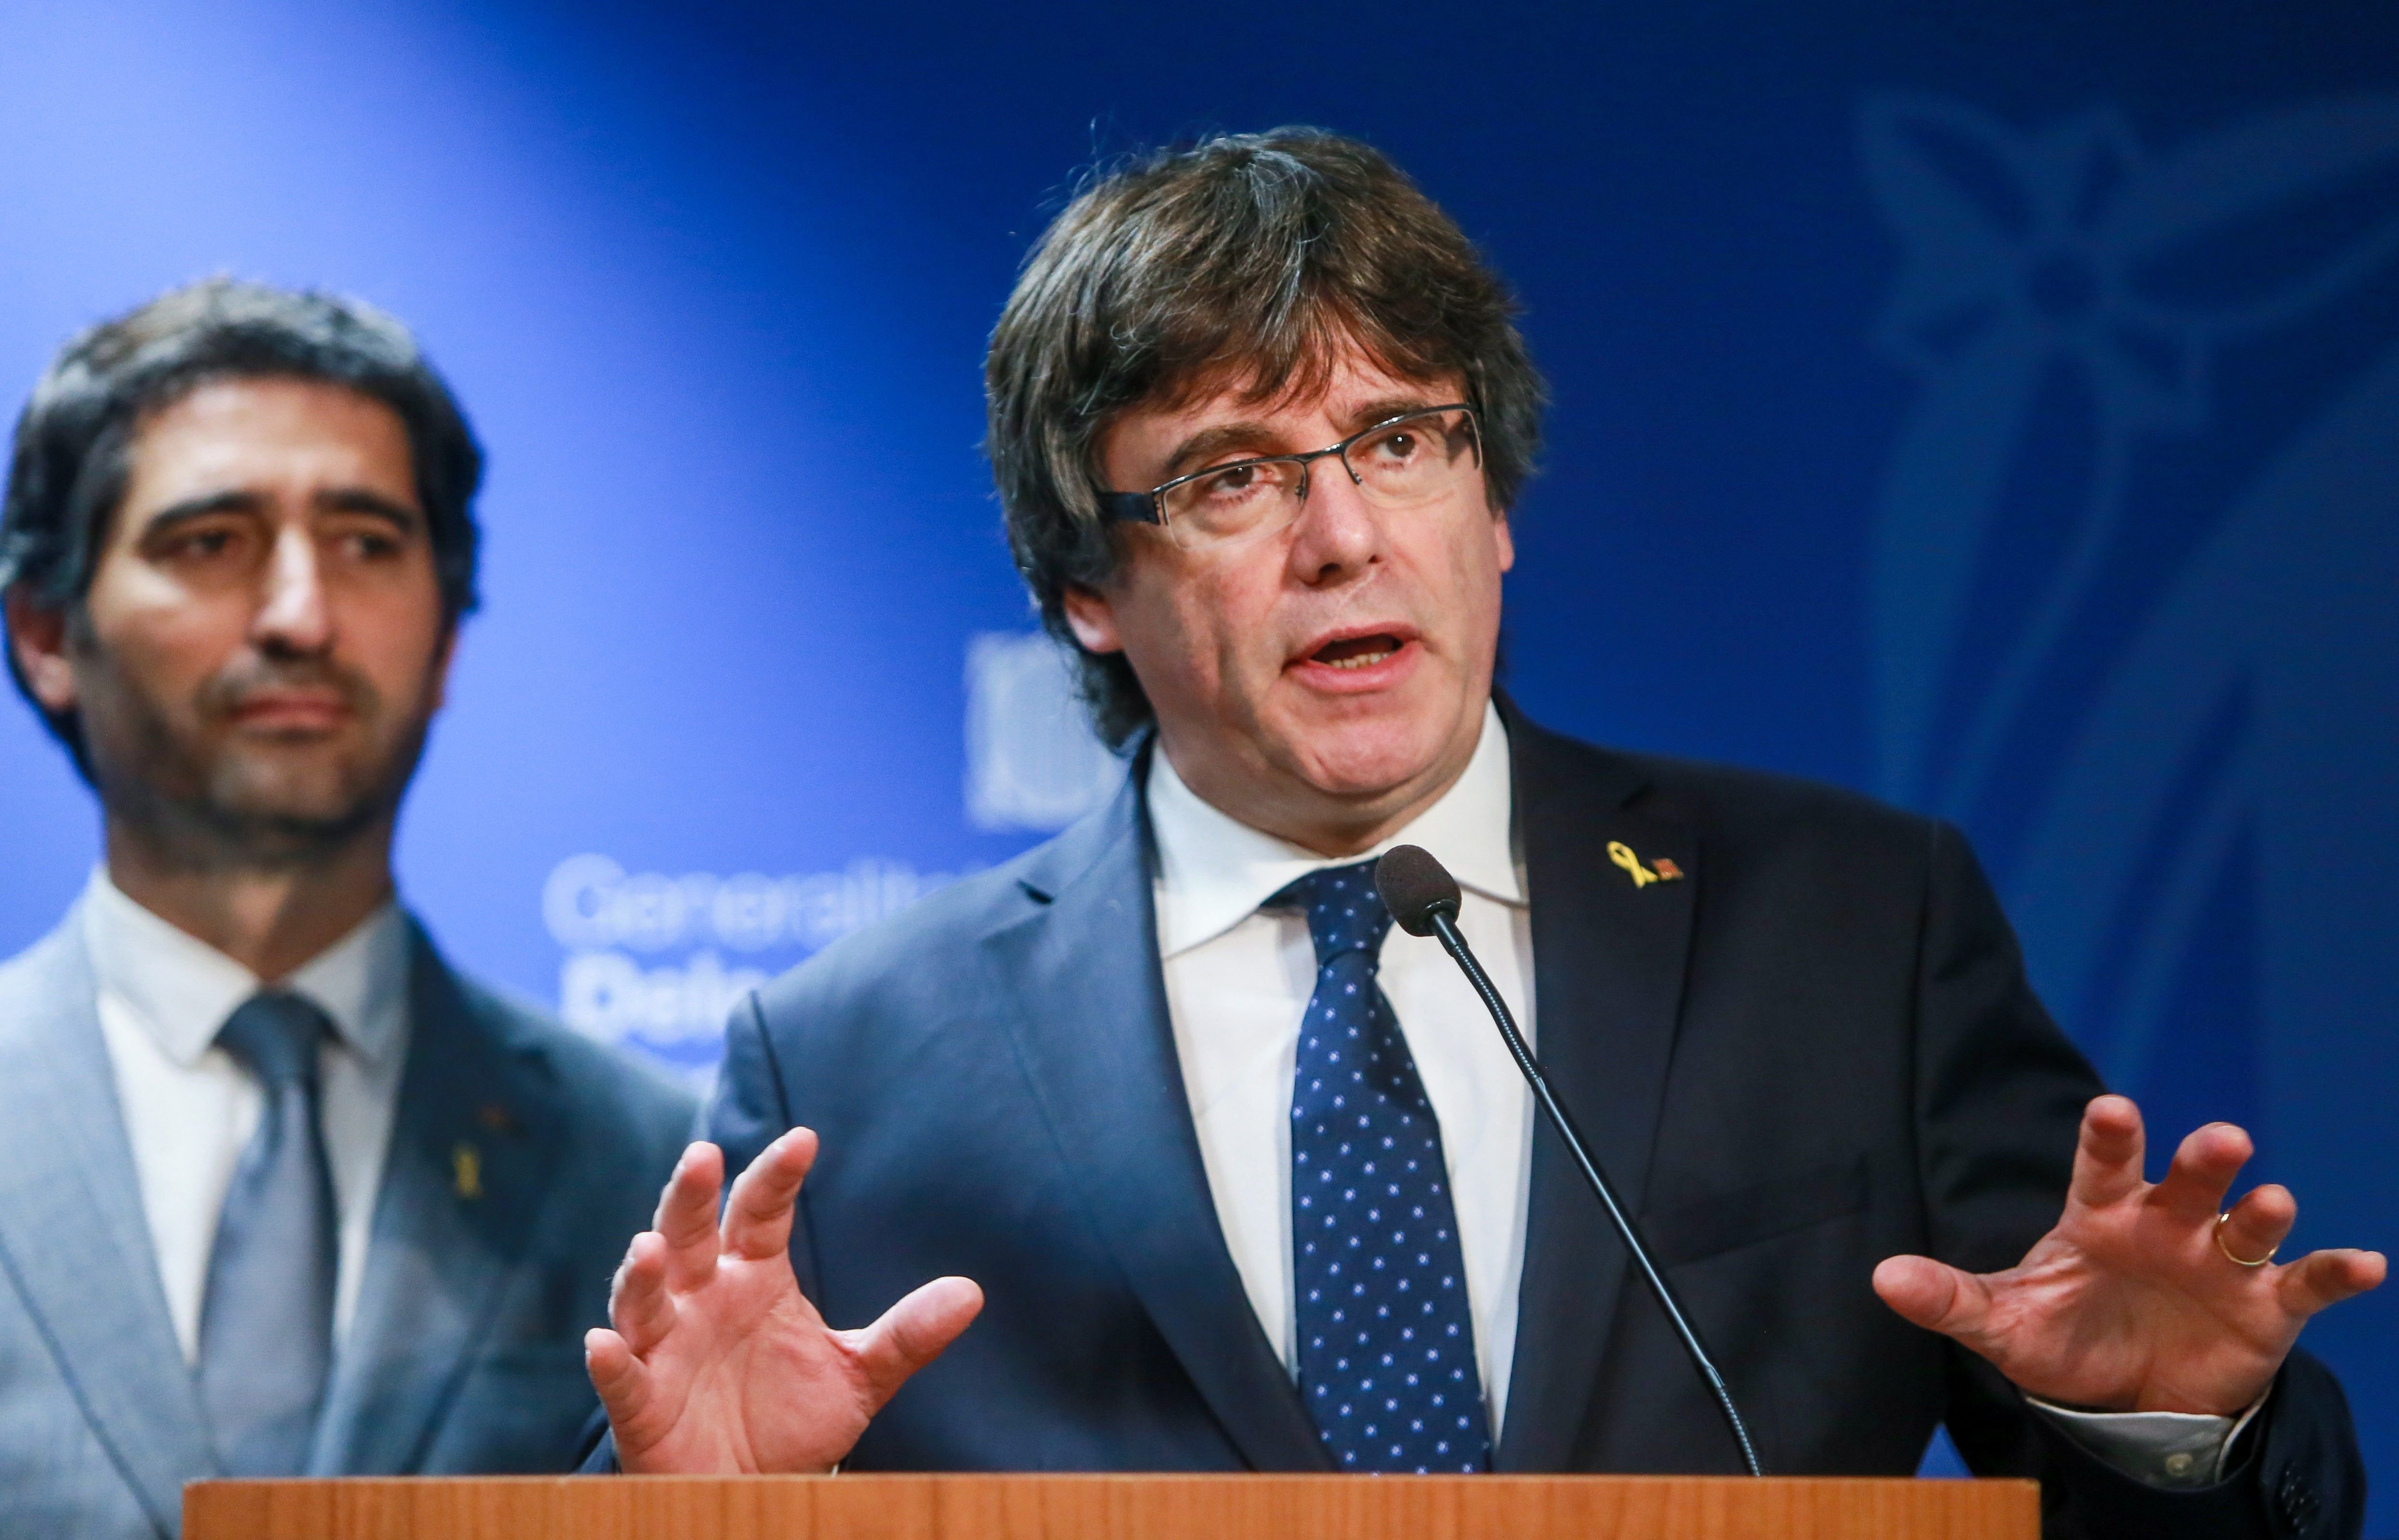 'Time' lists Puigdemont as a favourite for the Nobel Peace Prize